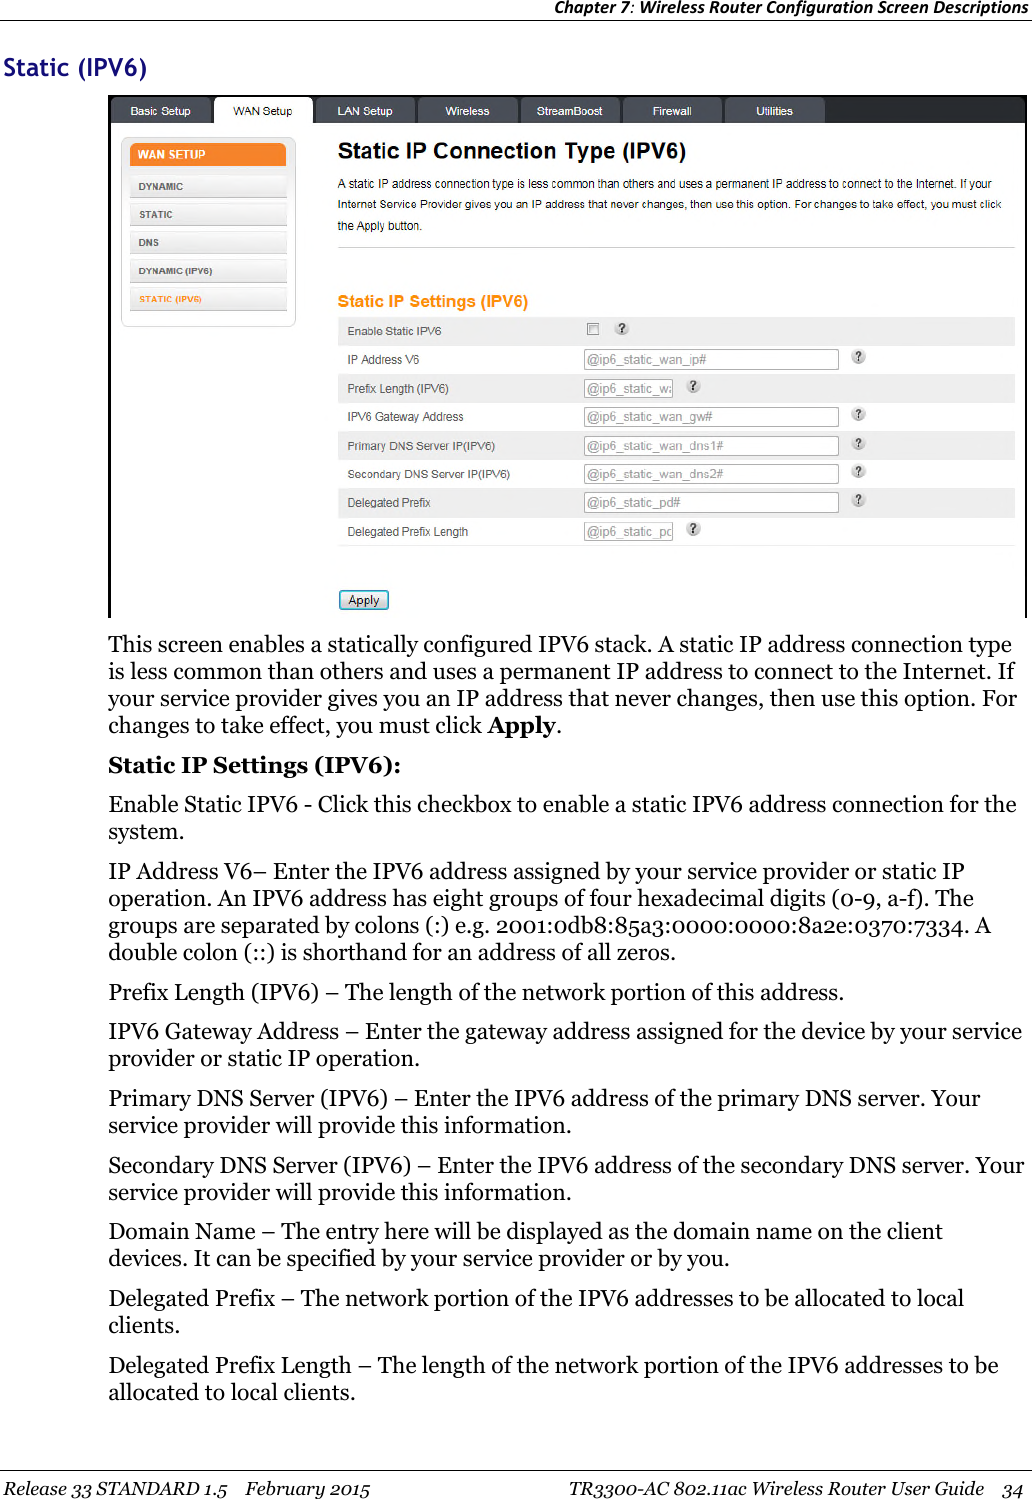 Chapter 7:Wireless Router Configuration Screen DescriptionsRelease 33 STANDARD 1.5 February 2015 TR3300-AC 802.11ac Wireless Router User Guide 34Static (IPV6)This screen enables a statically configured IPV6 stack. A static IP address connection typeis less common than others and uses a permanent IP address to connect to the Internet. Ifyour service provider gives you an IP address that never changes, then use this option. Forchanges to take effect, you must click Apply.Static IP Settings (IPV6):Enable Static IPV6 - Click this checkbox to enable a static IPV6 address connection for thesystem.IP Address V6– Enter the IPV6 address assigned by your service provider or static IPoperation. An IPV6 address has eight groups of four hexadecimal digits (0-9, a-f). Thegroups are separated by colons (:) e.g. 2001:0db8:85a3:0000:0000:8a2e:0370:7334. Adouble colon (::) is shorthand for an address of all zeros.Prefix Length (IPV6) – The length of the network portion of this address.IPV6 Gateway Address – Enter the gateway address assigned for the device by your serviceprovider or static IP operation.Primary DNS Server (IPV6) – Enter the IPV6 address of the primary DNS server. Yourservice provider will provide this information.Secondary DNS Server (IPV6) – Enter the IPV6 address of the secondary DNS server. Yourservice provider will provide this information.Domain Name – The entry here will be displayed as the domain name on the clientdevices. It can be specified by your service provider or by you.Delegated Prefix – The network portion of the IPV6 addresses to be allocated to localclients.Delegated Prefix Length – The length of the network portion of the IPV6 addresses to beallocated to local clients.